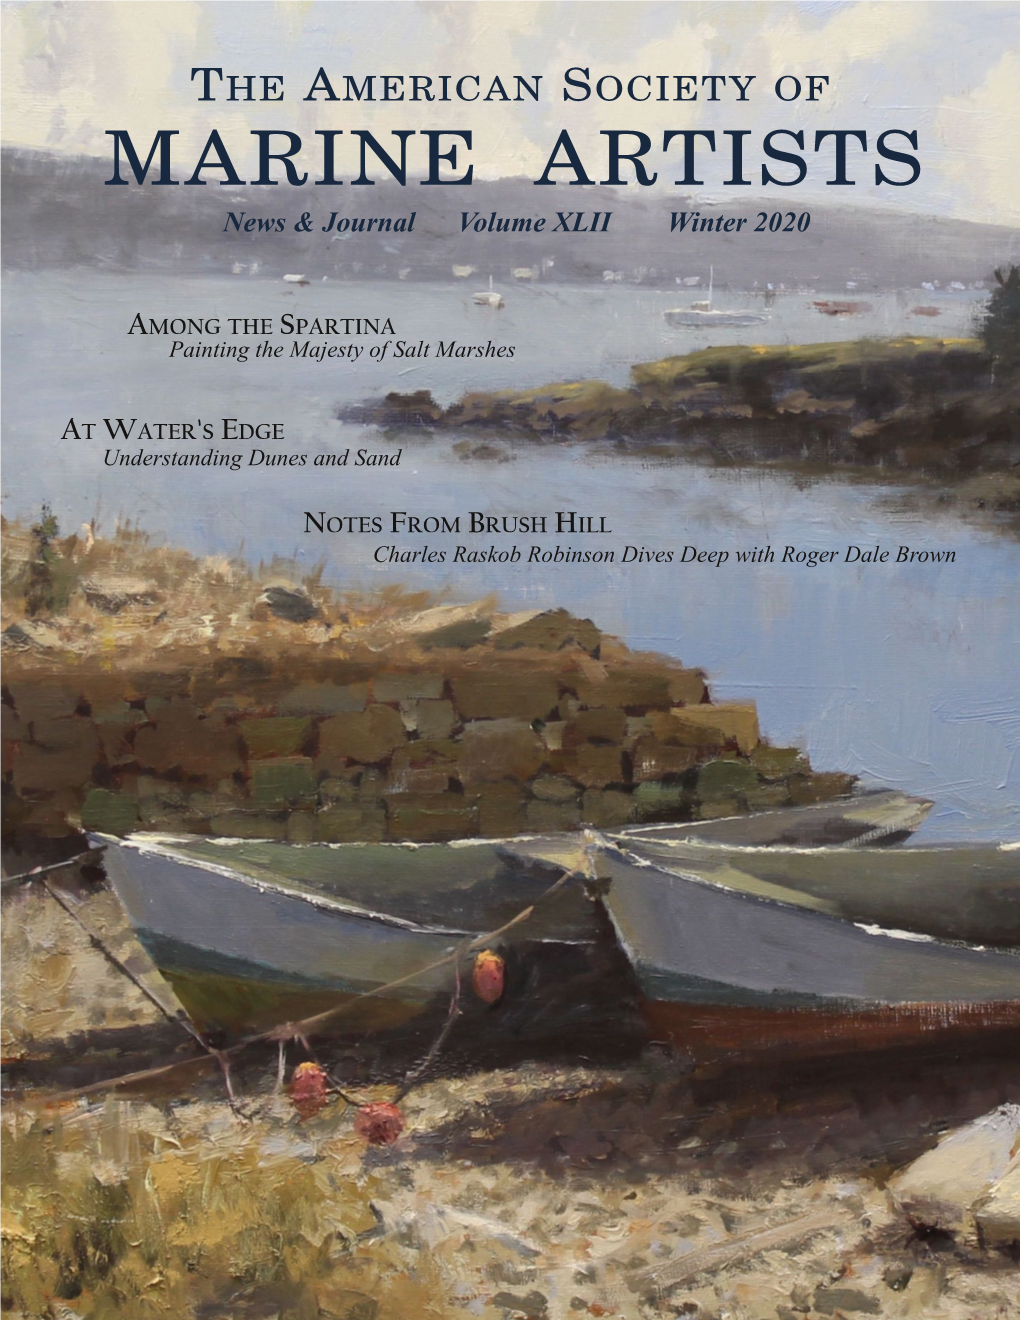 The American Society Ofmarine Artists 18Th National Exhibition Will Debut at the Jamestown Settlement Museum in Jamestown, Virginia